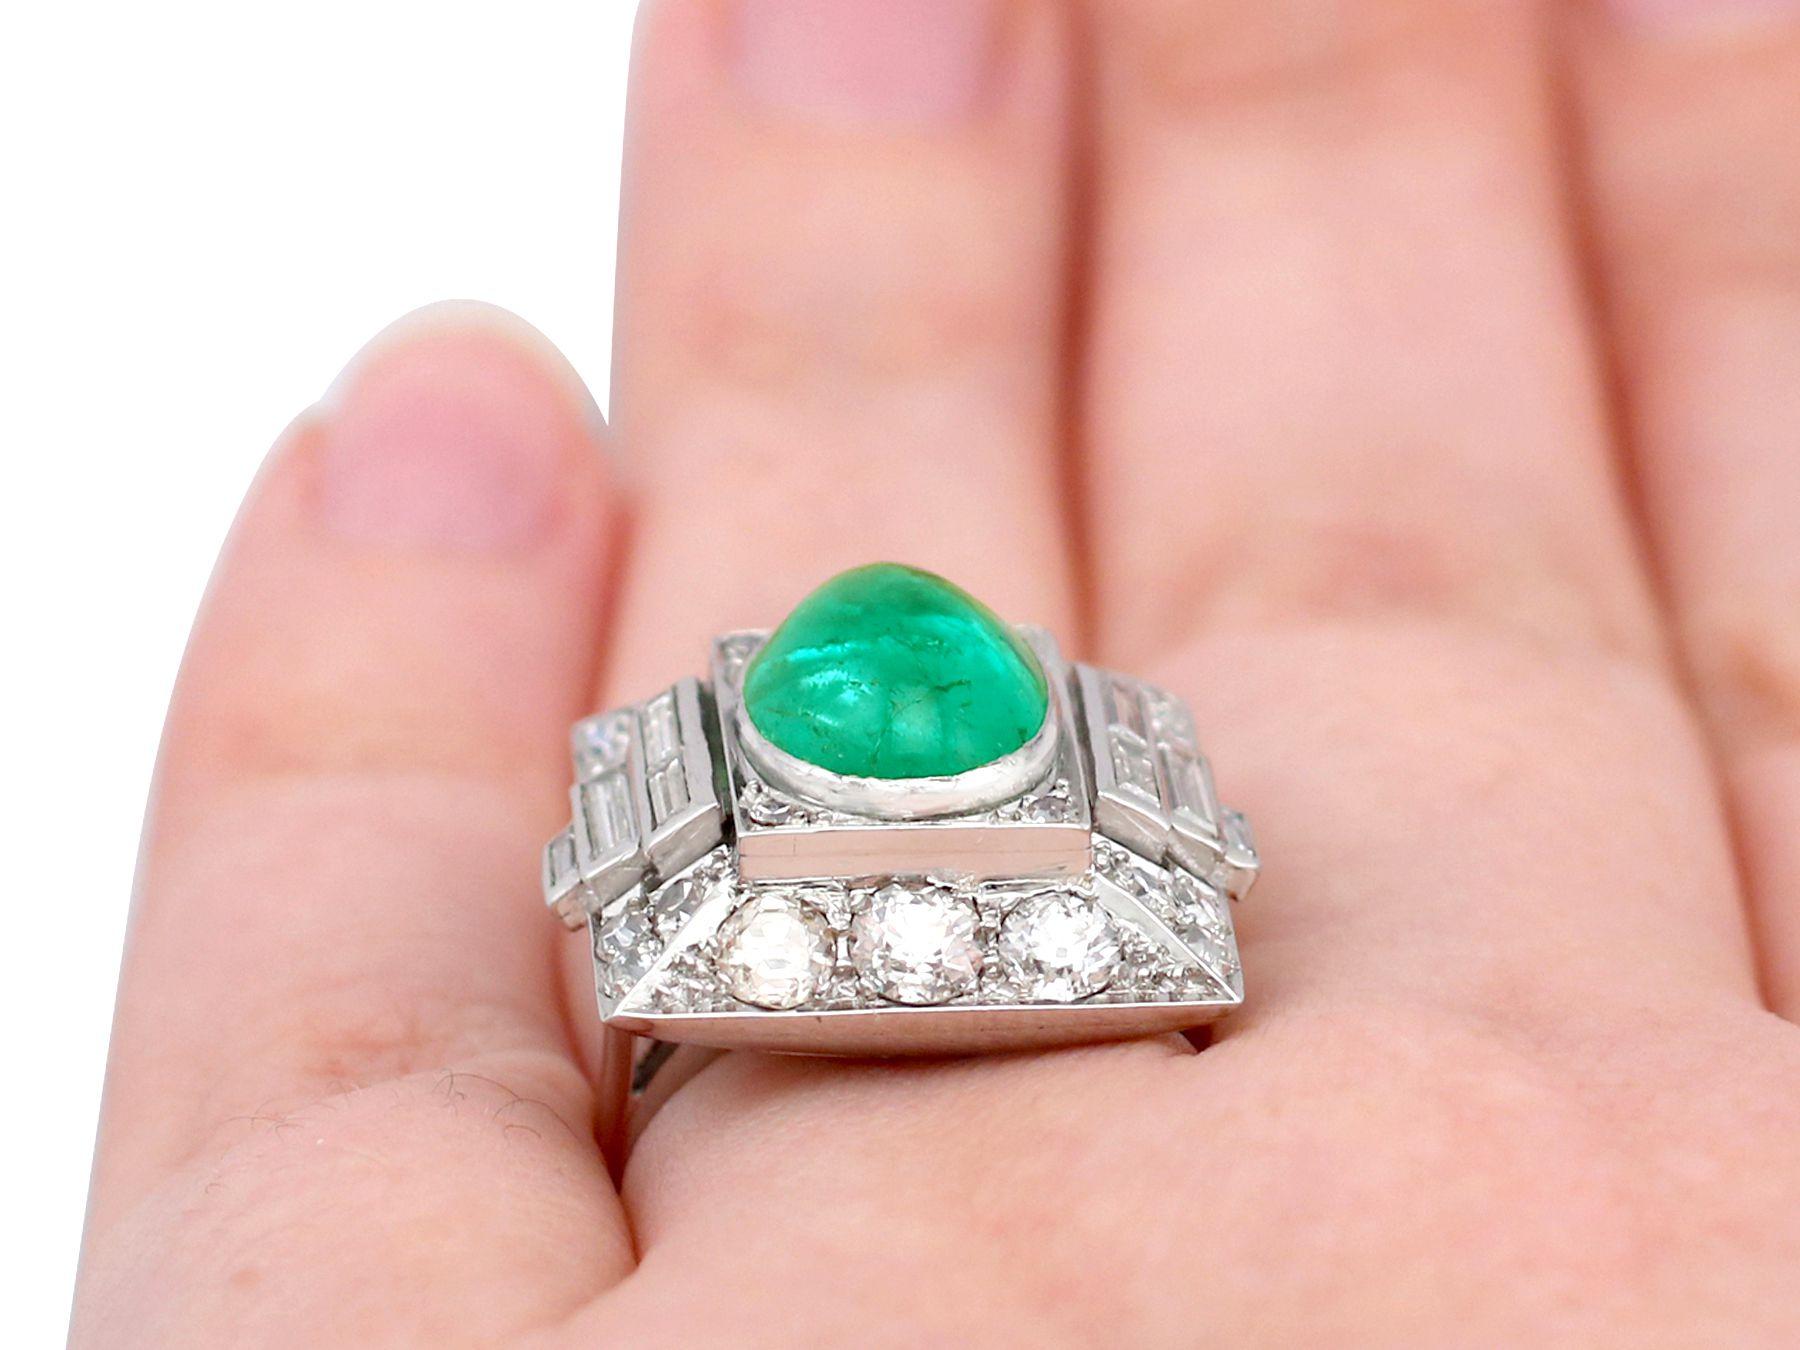 1935 Antique 3.40ct Cabochon Cut Emerald and 2.72ct Diamond Cocktail Ring For Sale 3